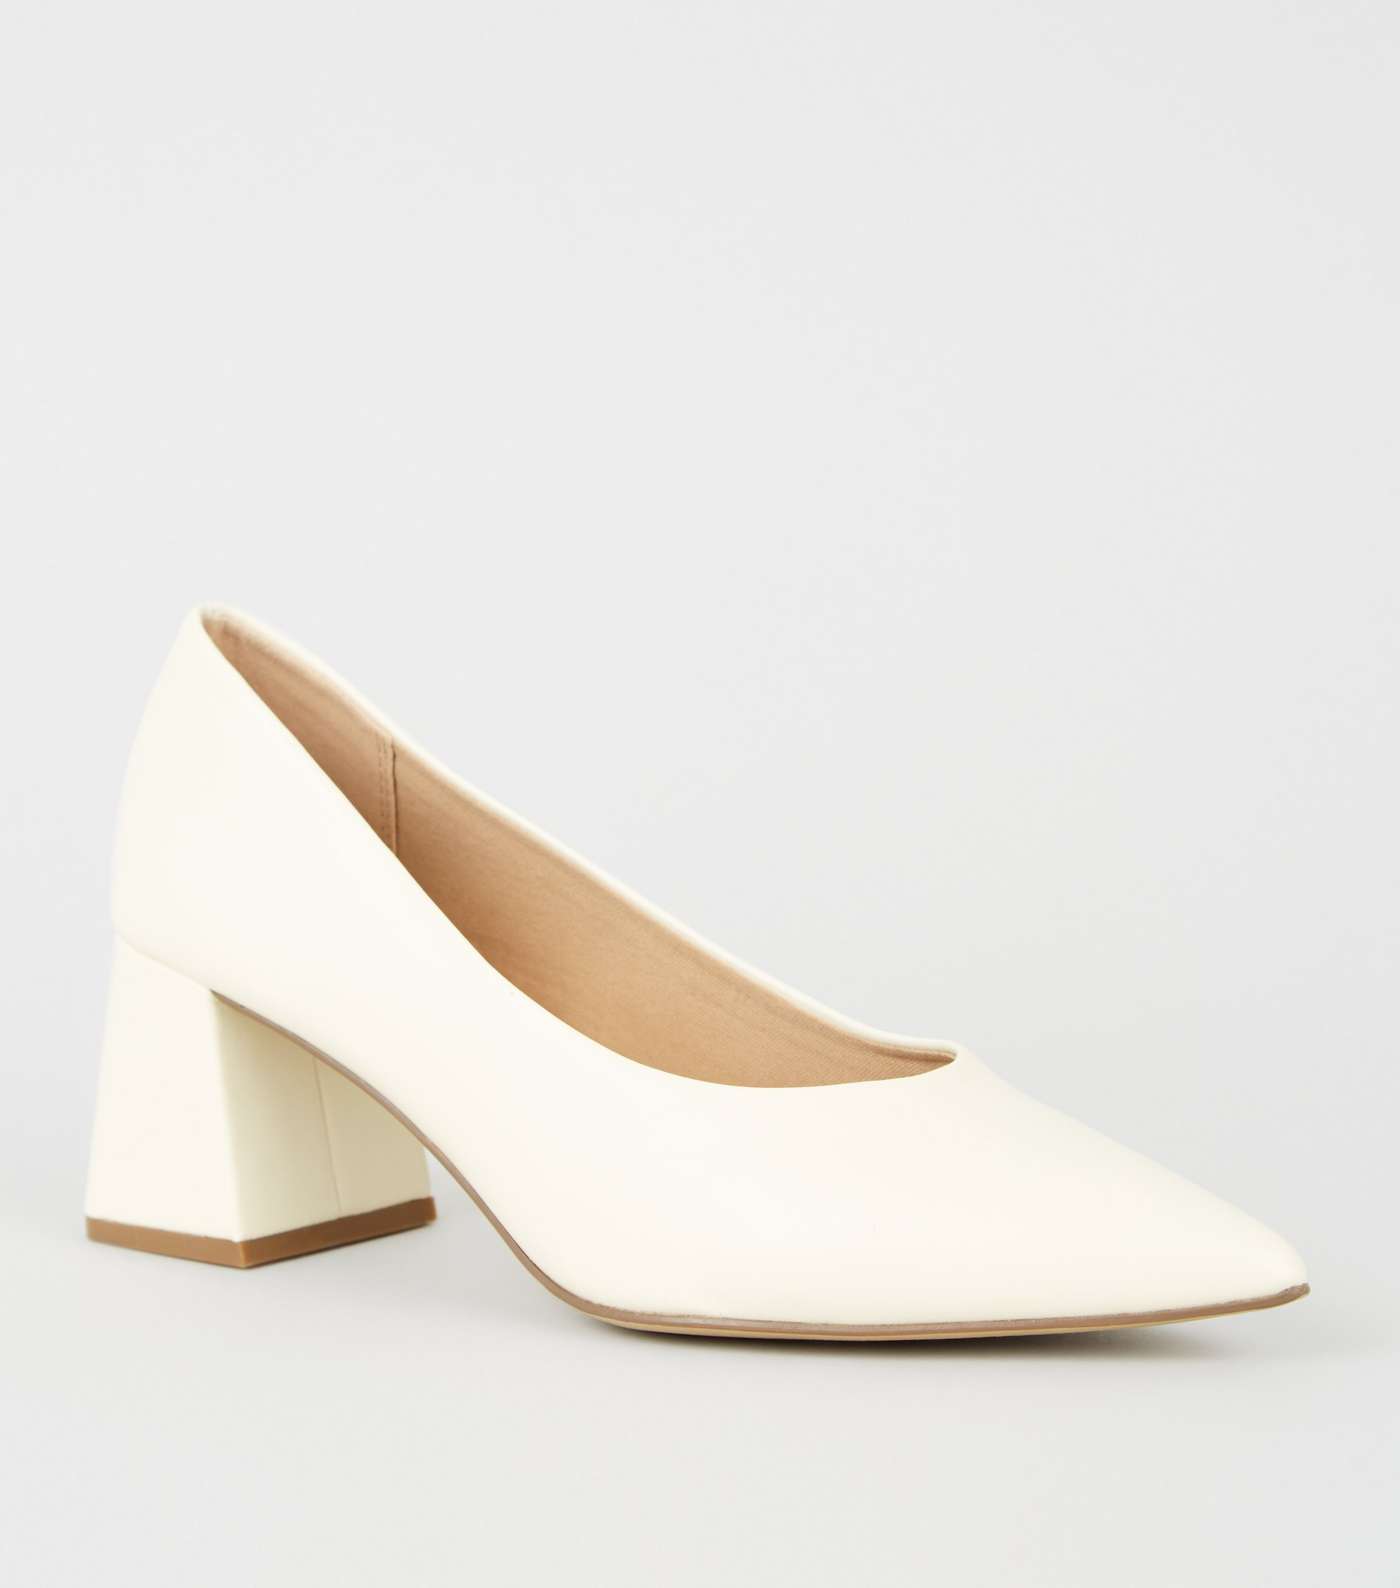 Off White Leather-Look Flared Court Shoes